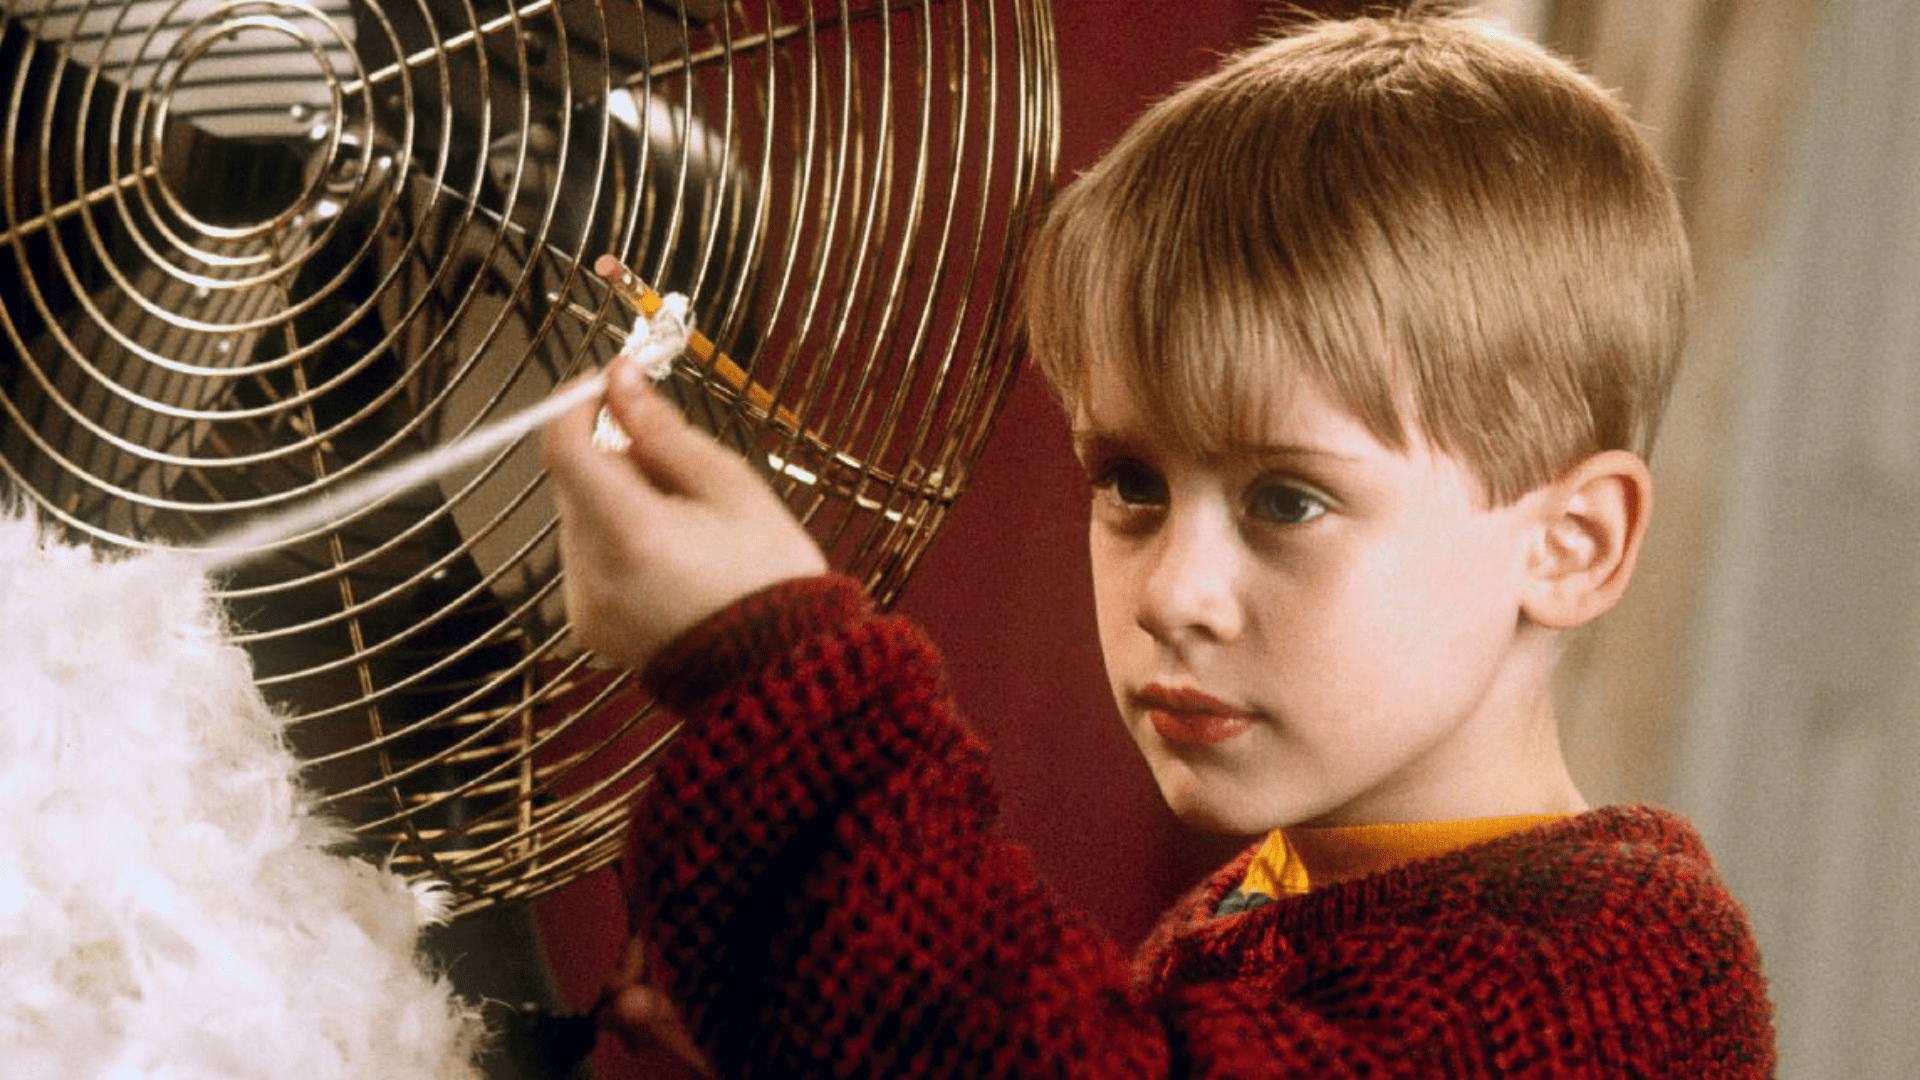 83 Home Alone (1990) Facts To Get You In The Christmas Spirit - Home Alone Facts